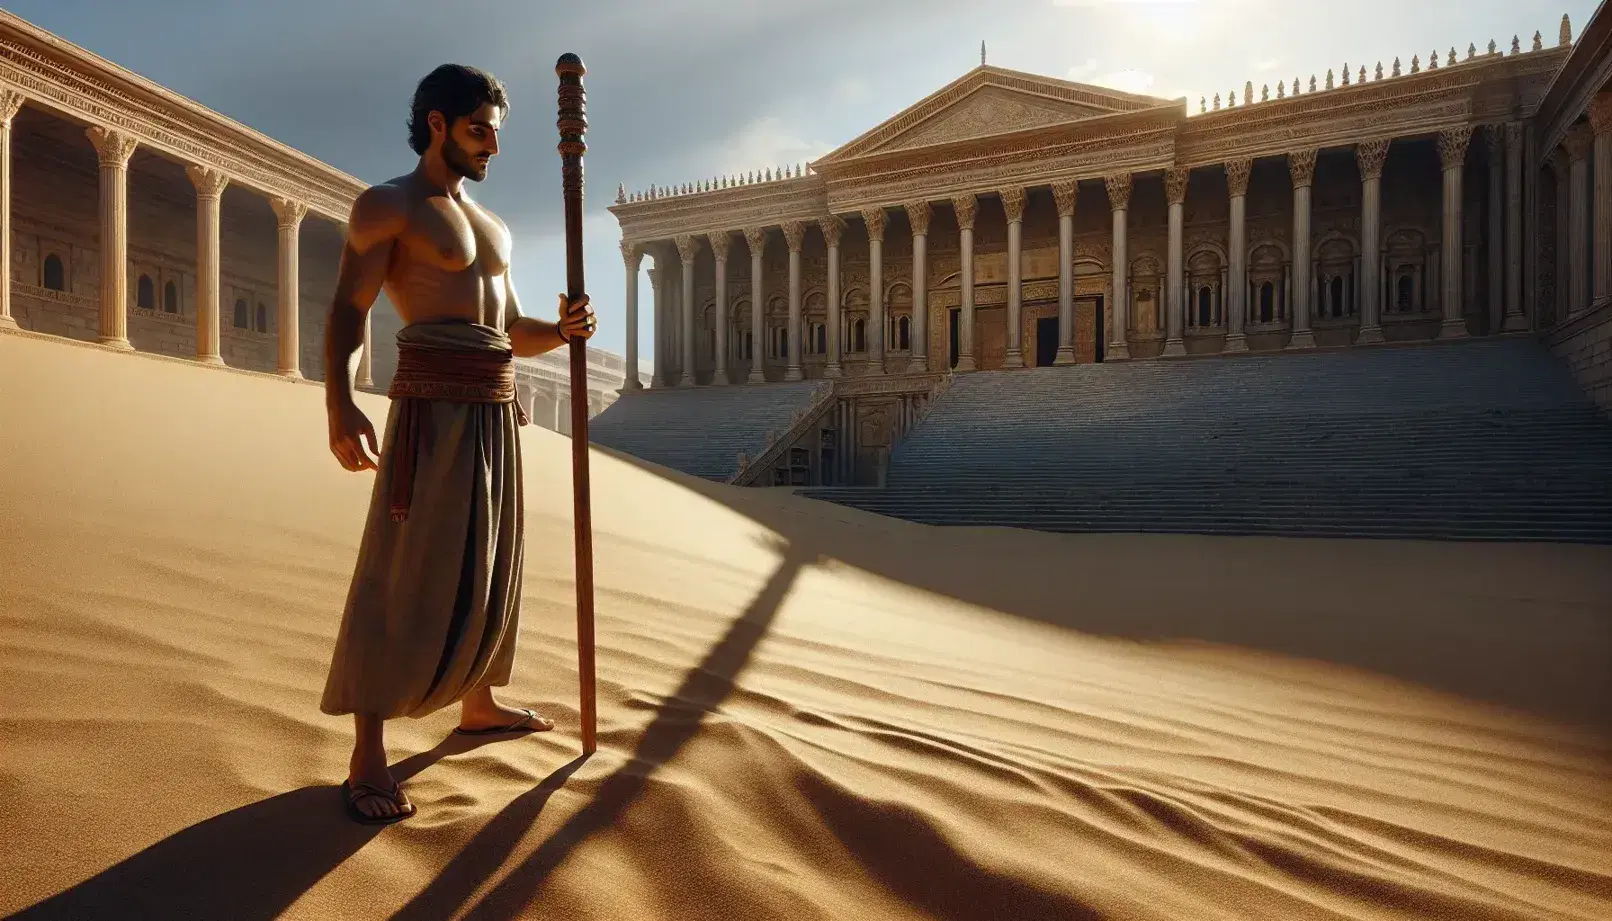 South Asian man measures the shadow of a stick in ancient Alexandria, with the Library in the background and a stone well to the right.